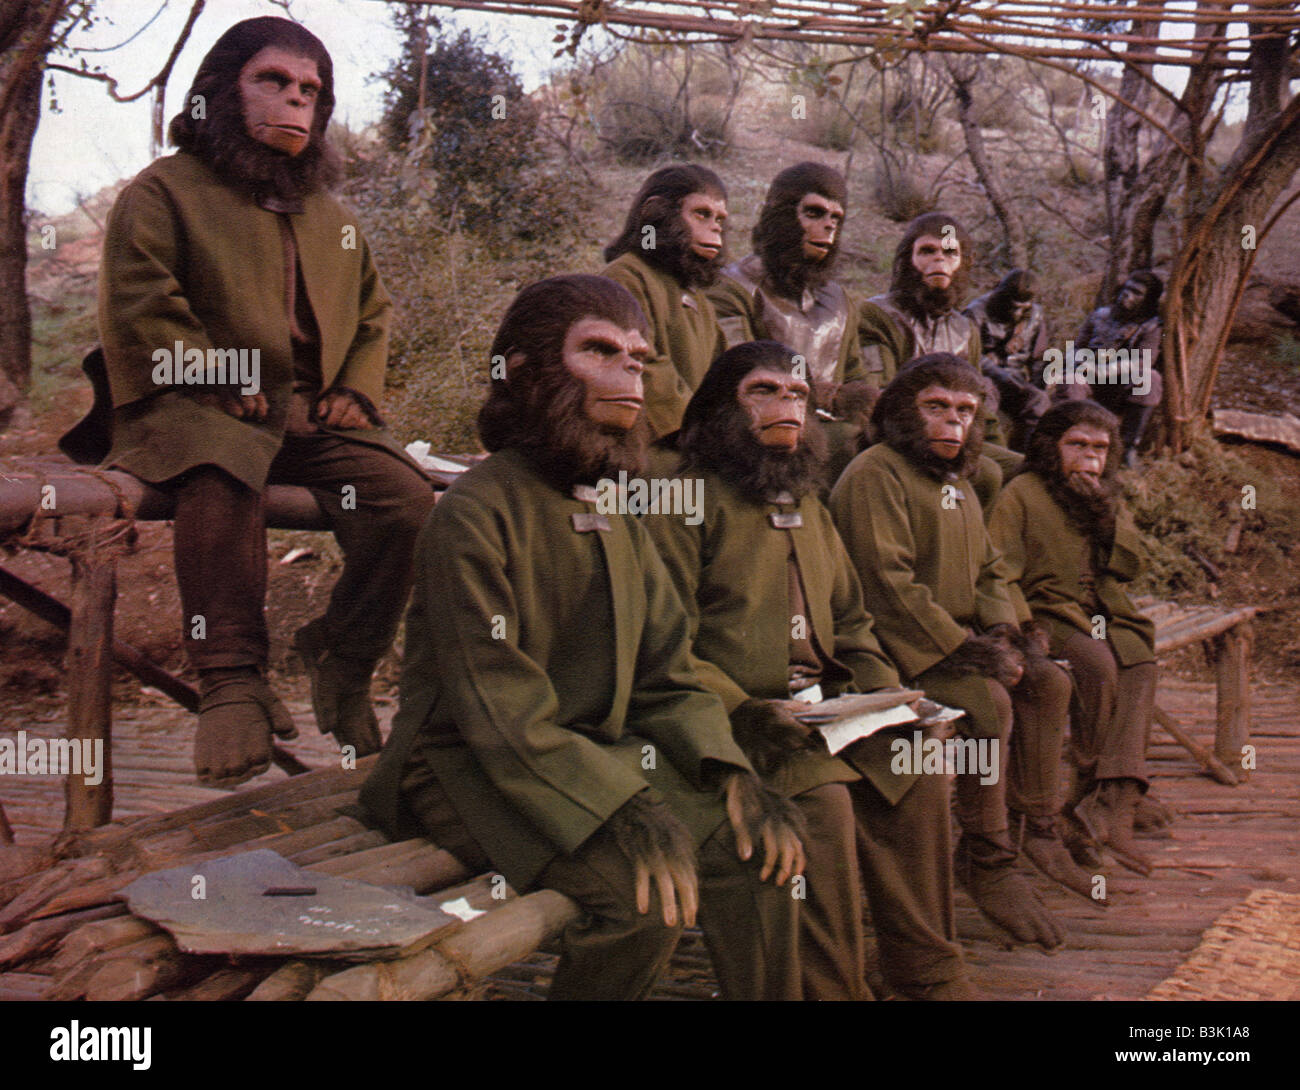 BATTLE FOR THE PLANET OF THE APES 1973 TCF/APJAC film Stock Photo